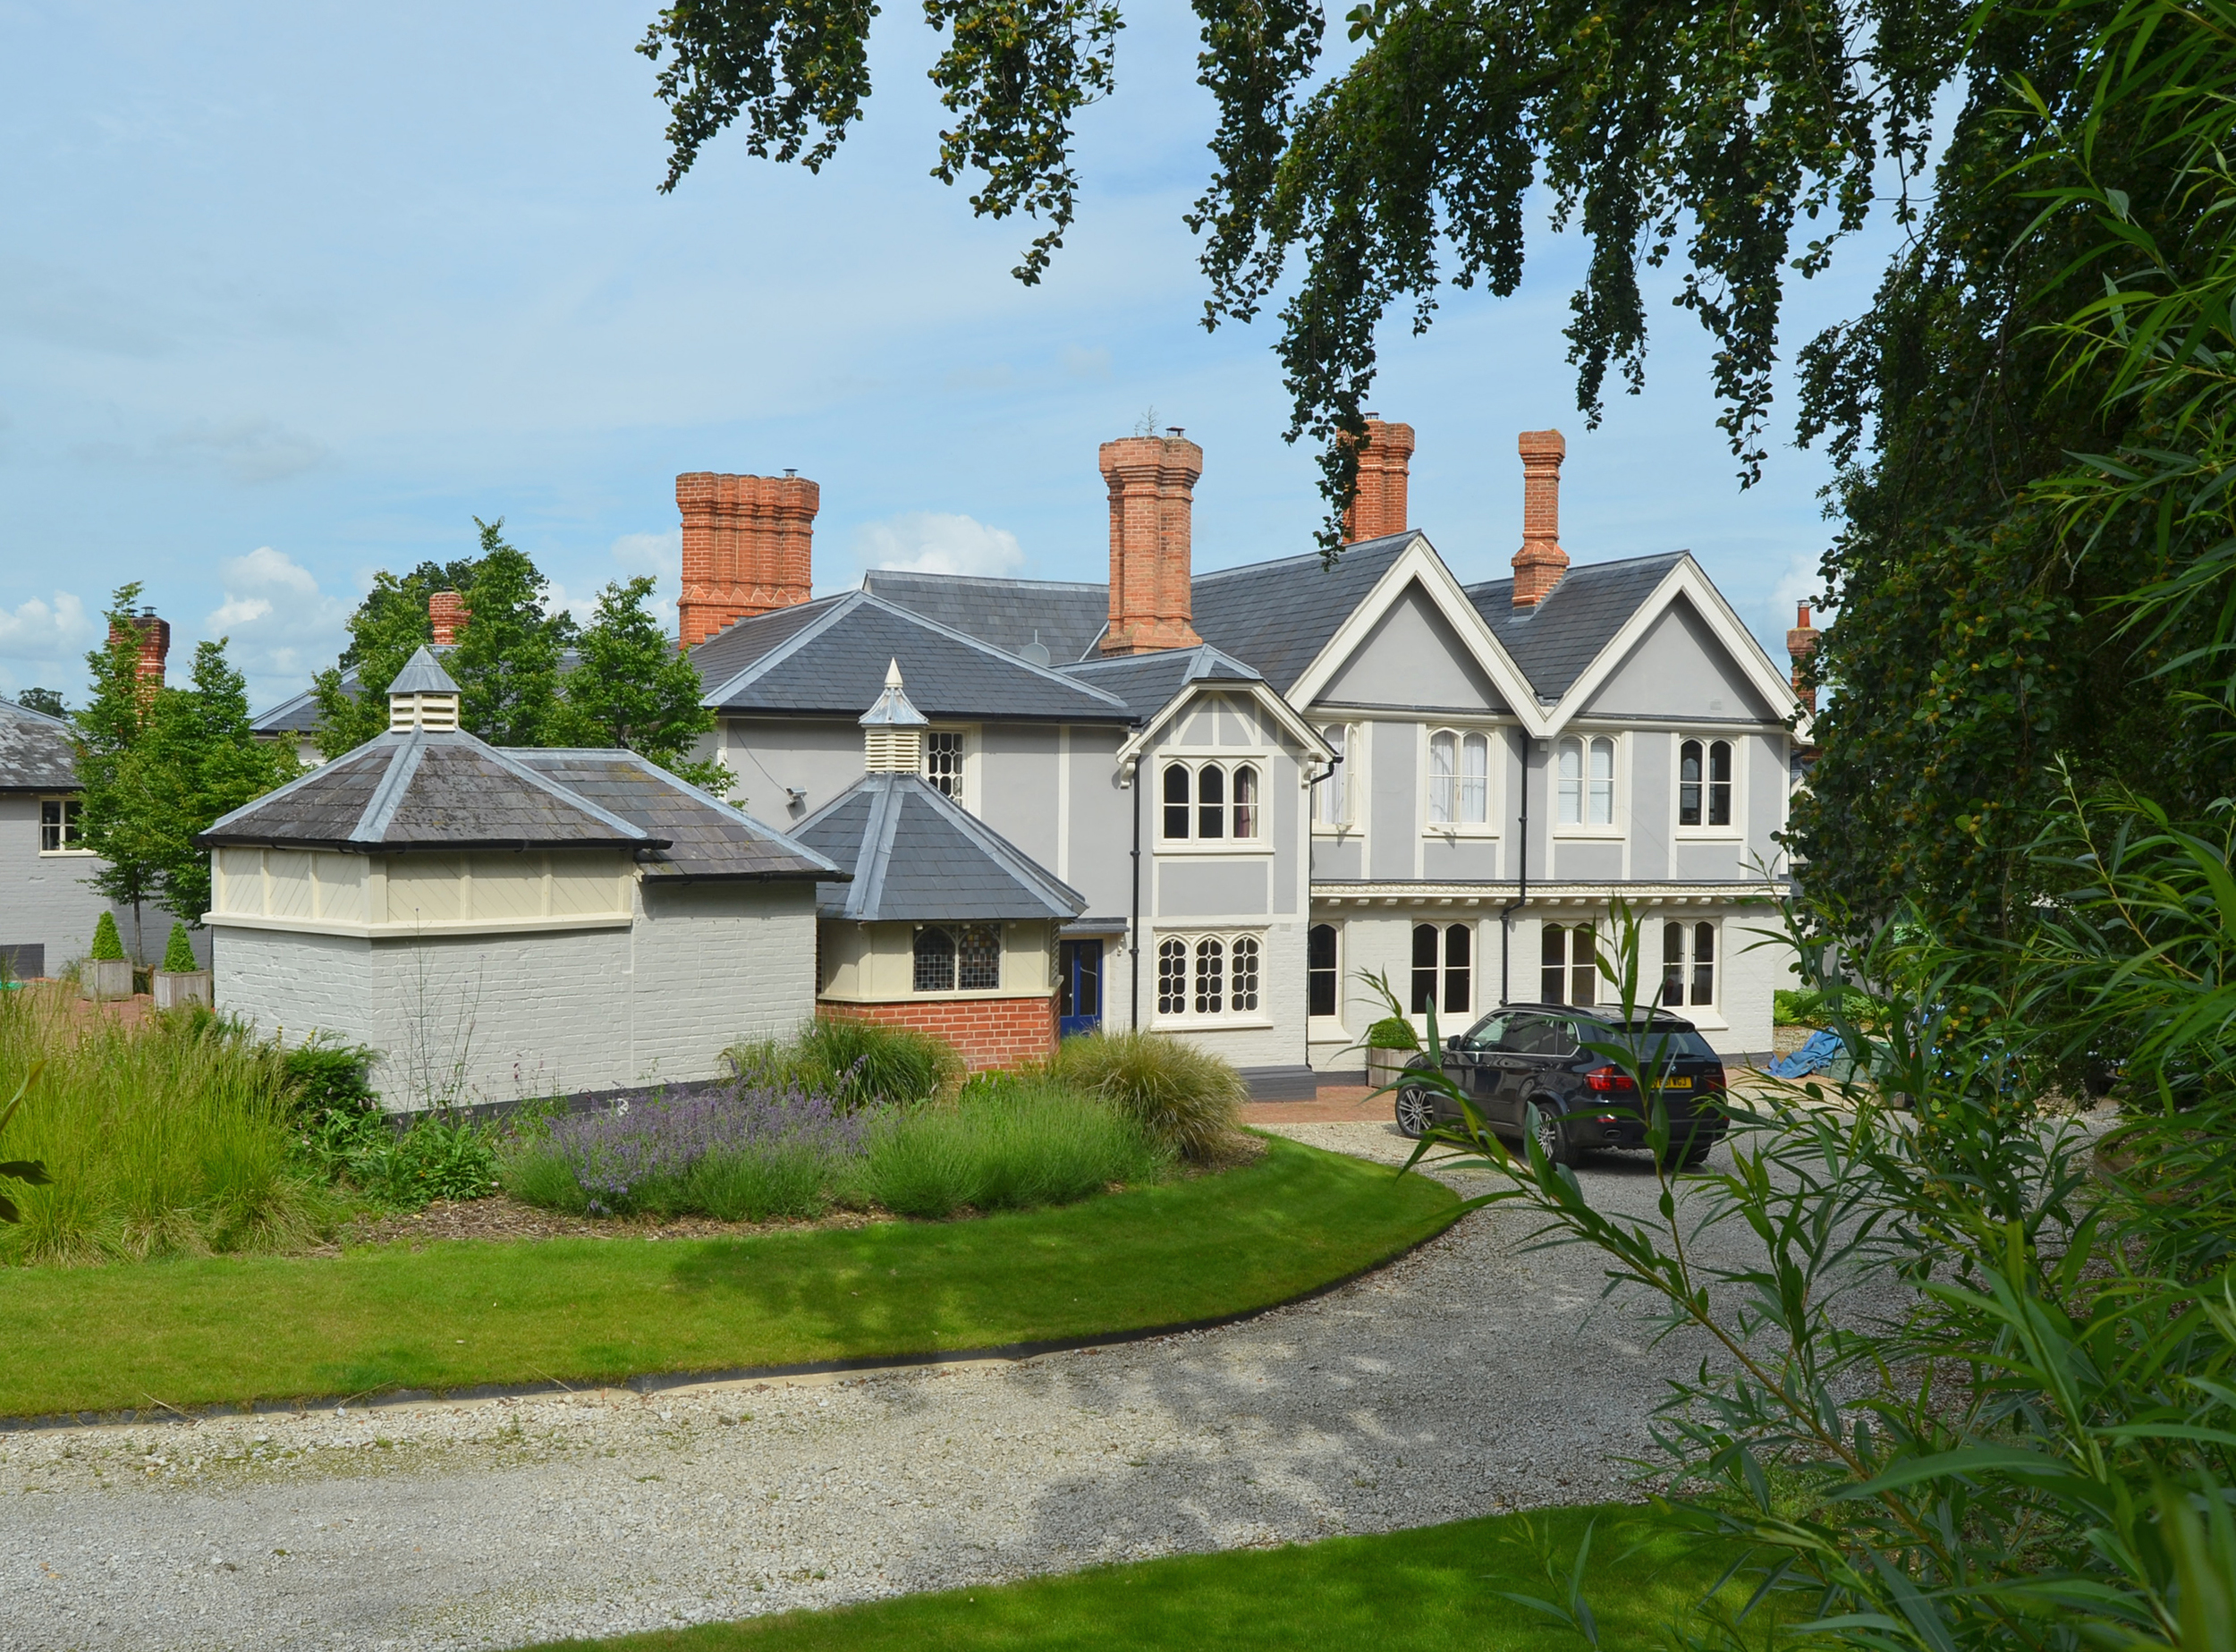  Extensive landscaping works were undertaken to enhance the setting of the listed building. 